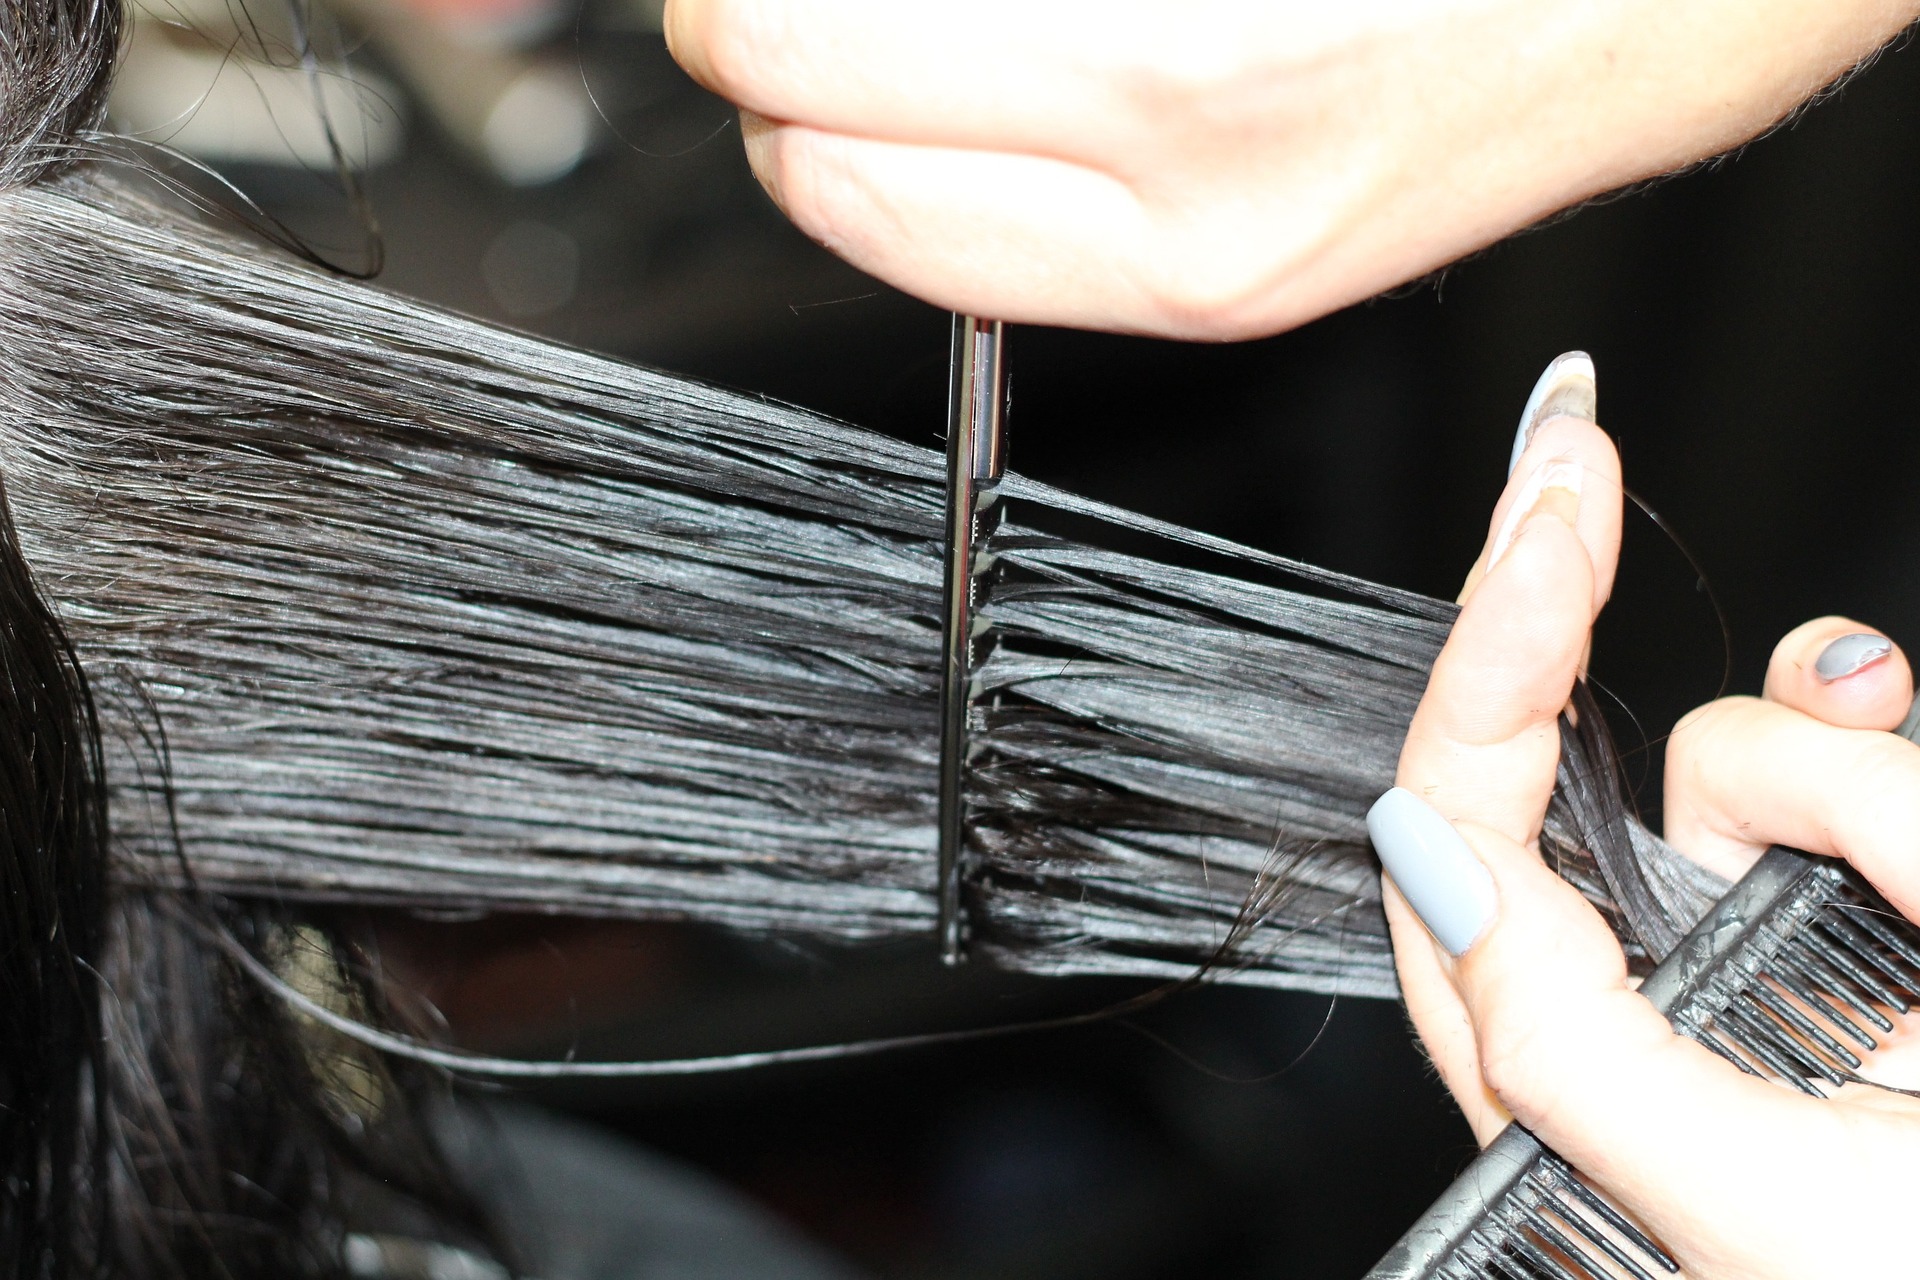 Guide to COSHH for Hairdresser